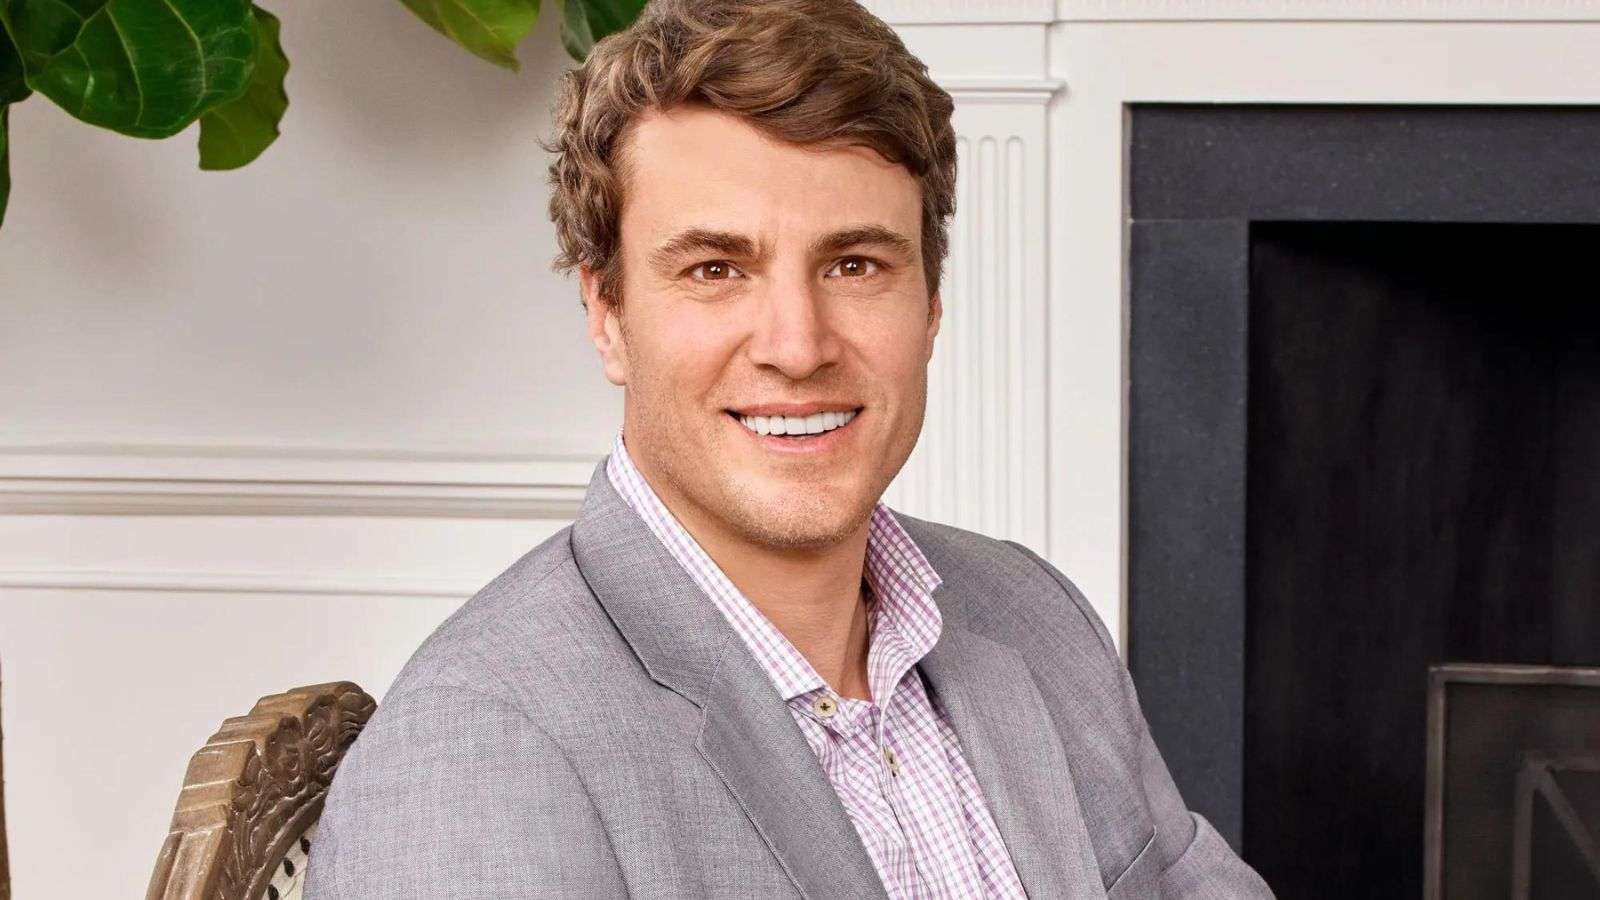 Shep from Southern Charm